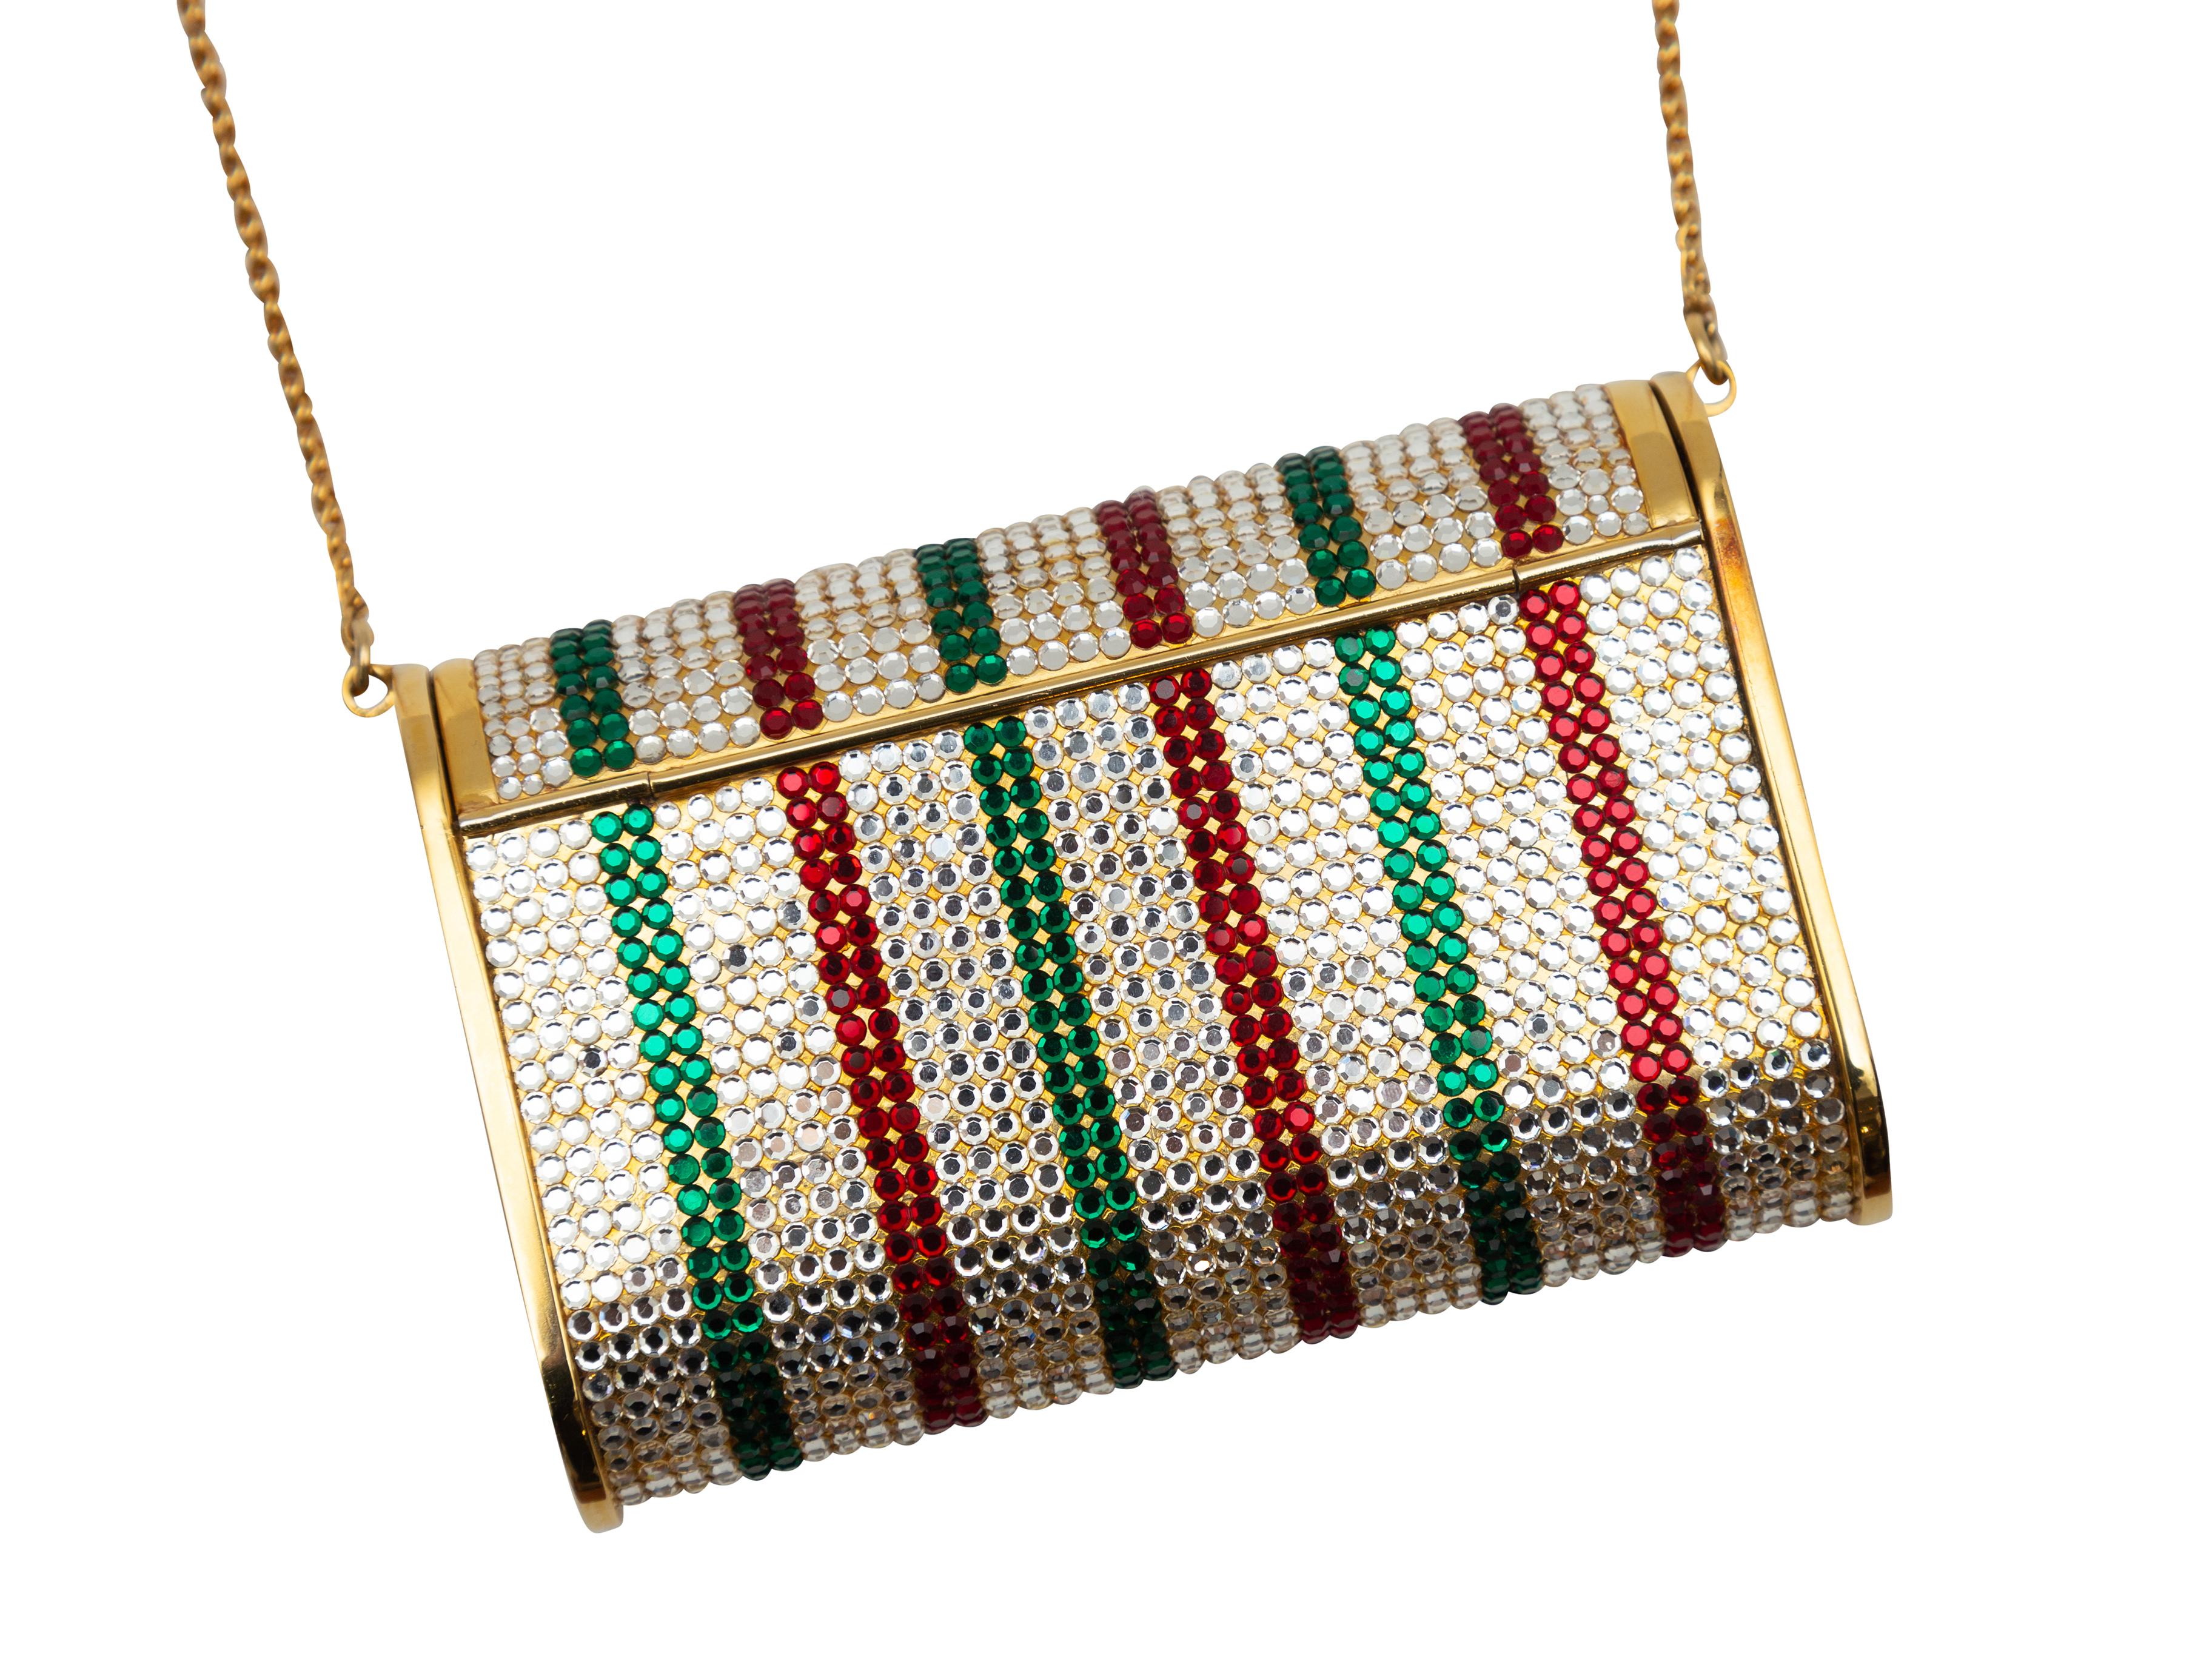 Women's Judith Leiber Gold & Multicolor Crystal Striped Purse